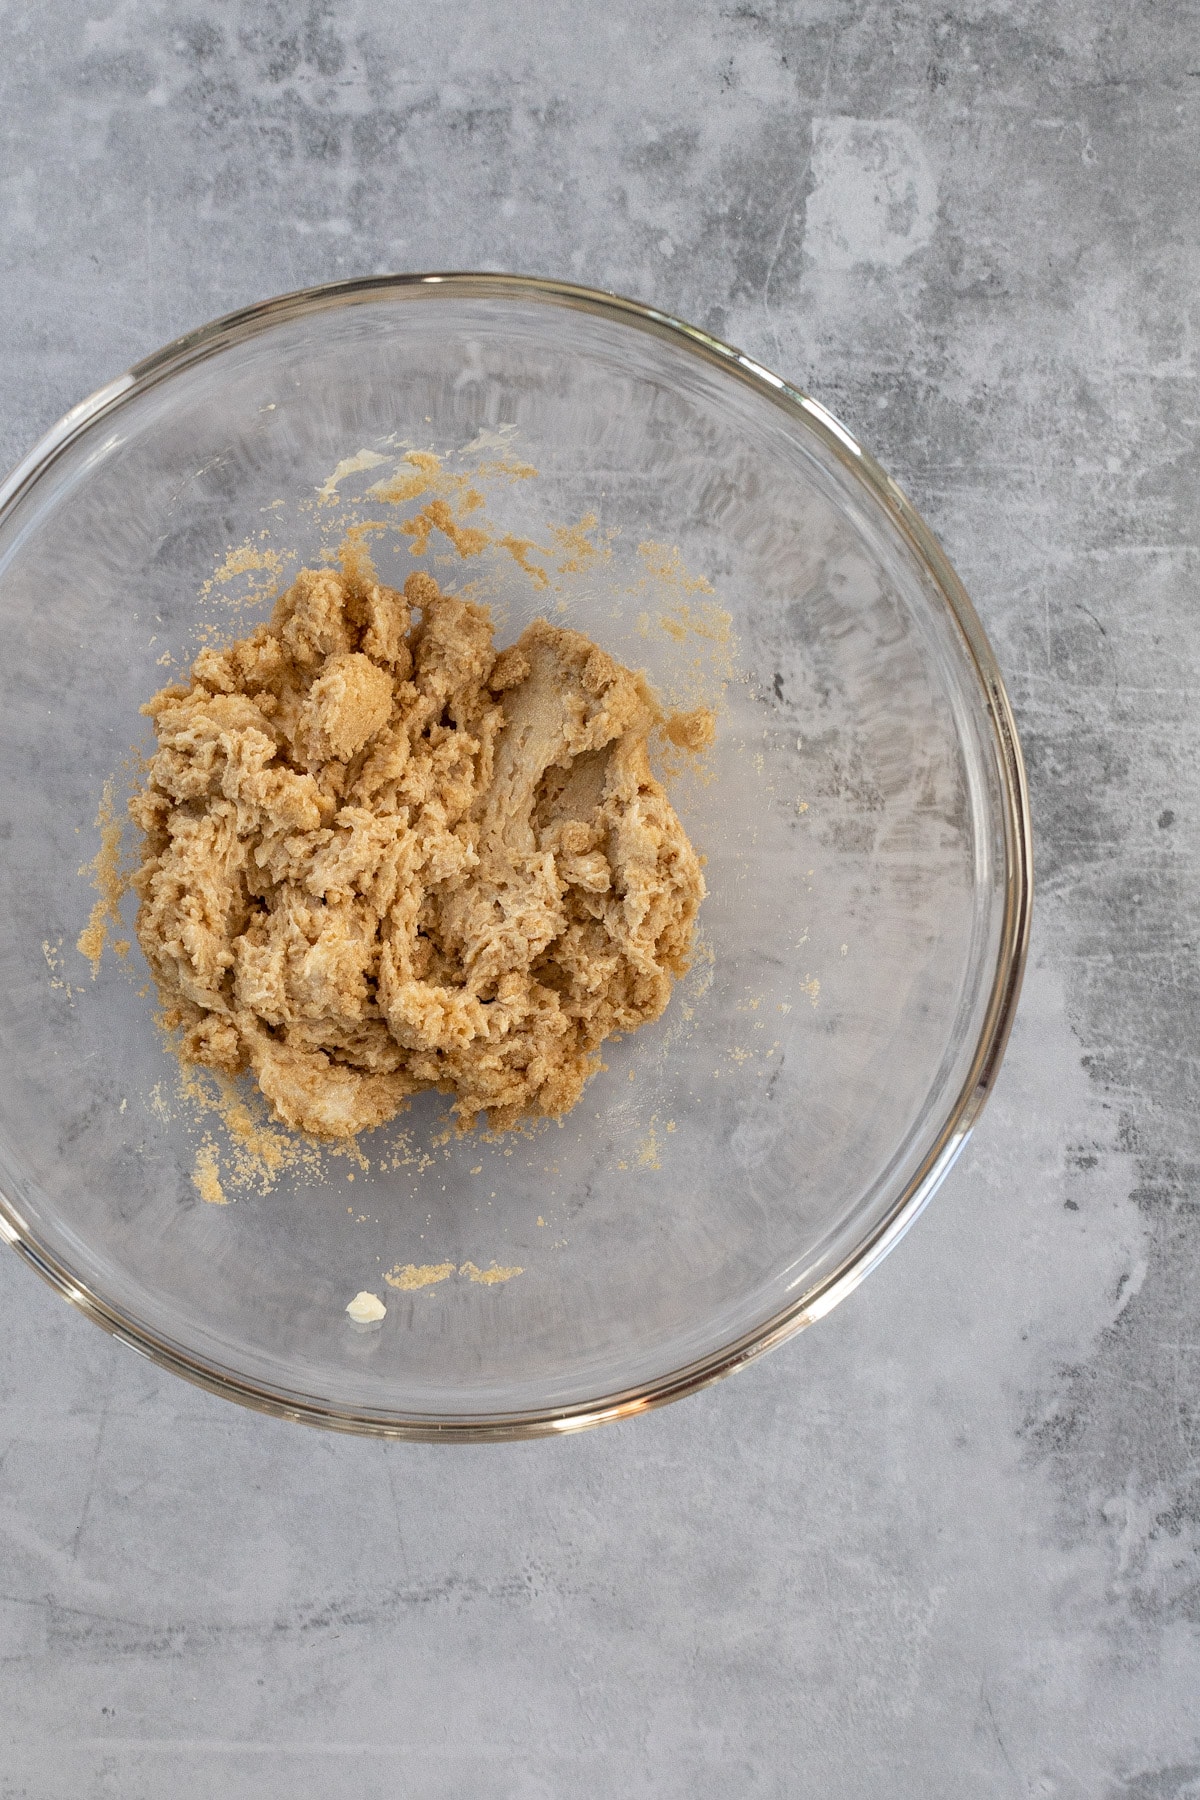 Brown sugar and butter creamed together in a glass mixing bowl.